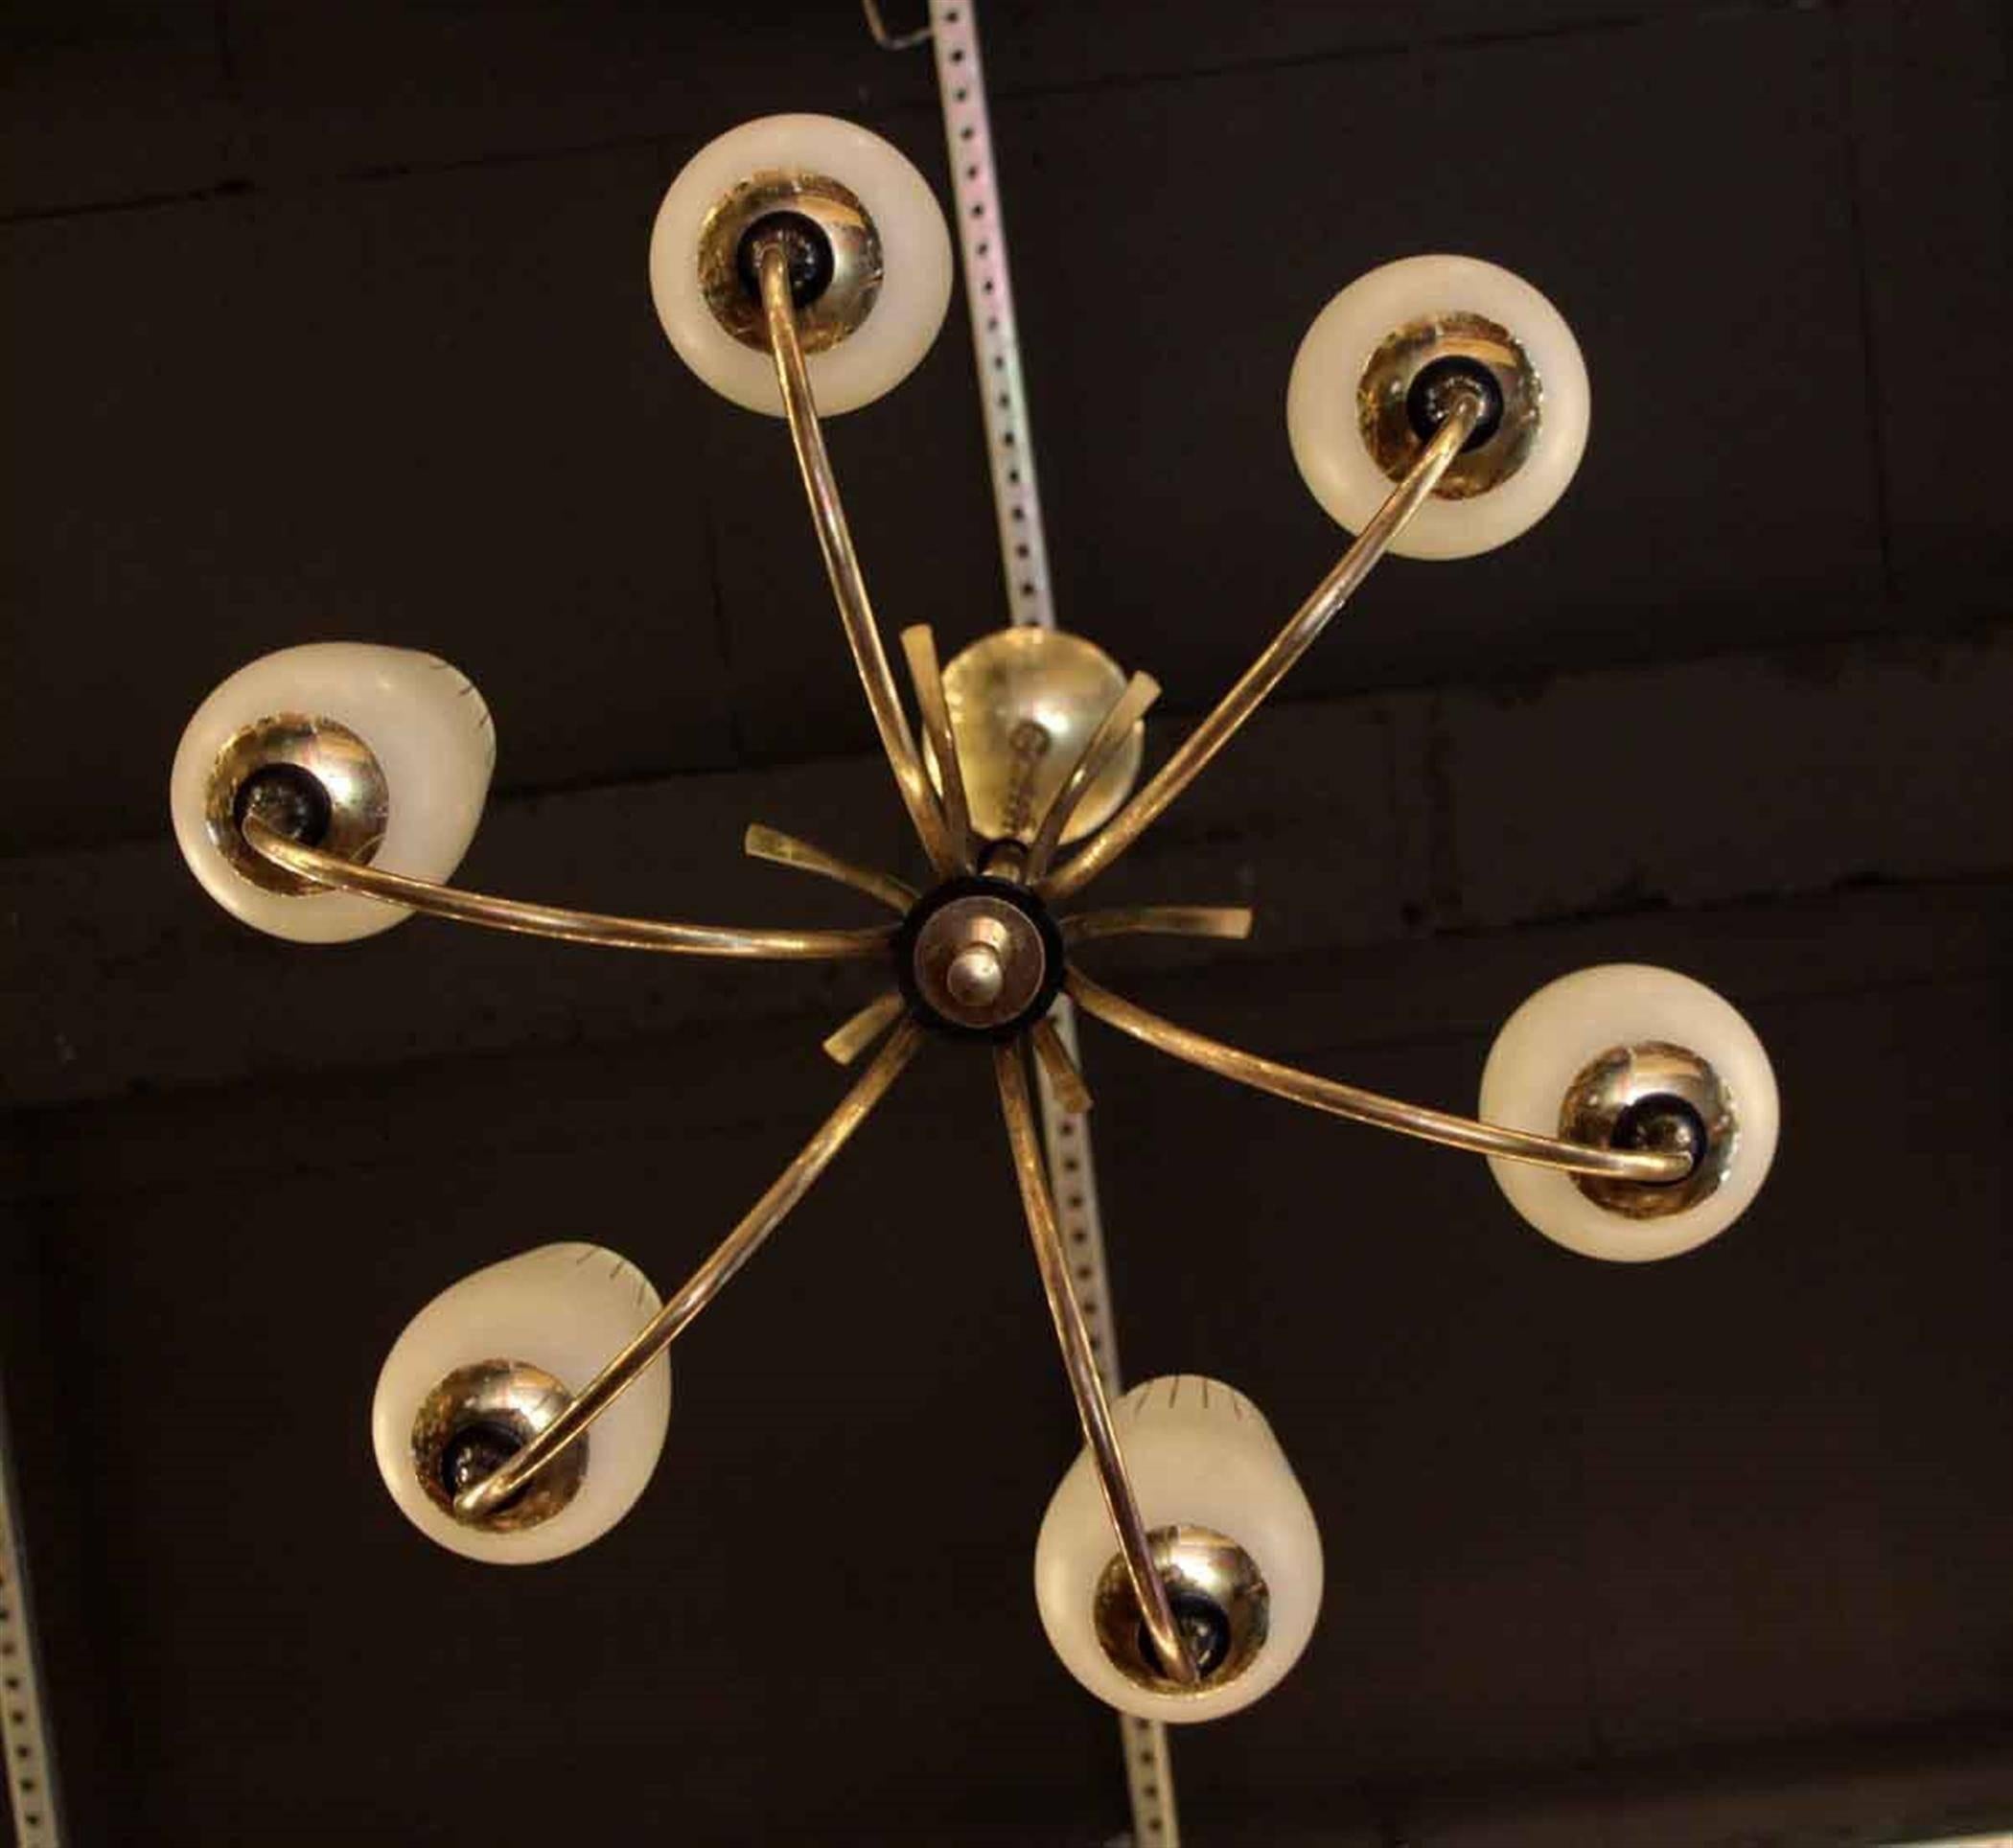 Mid-20th Century 1960s Mid-Century Modern Chandelier with Six Arms in a Polished Brass Finish